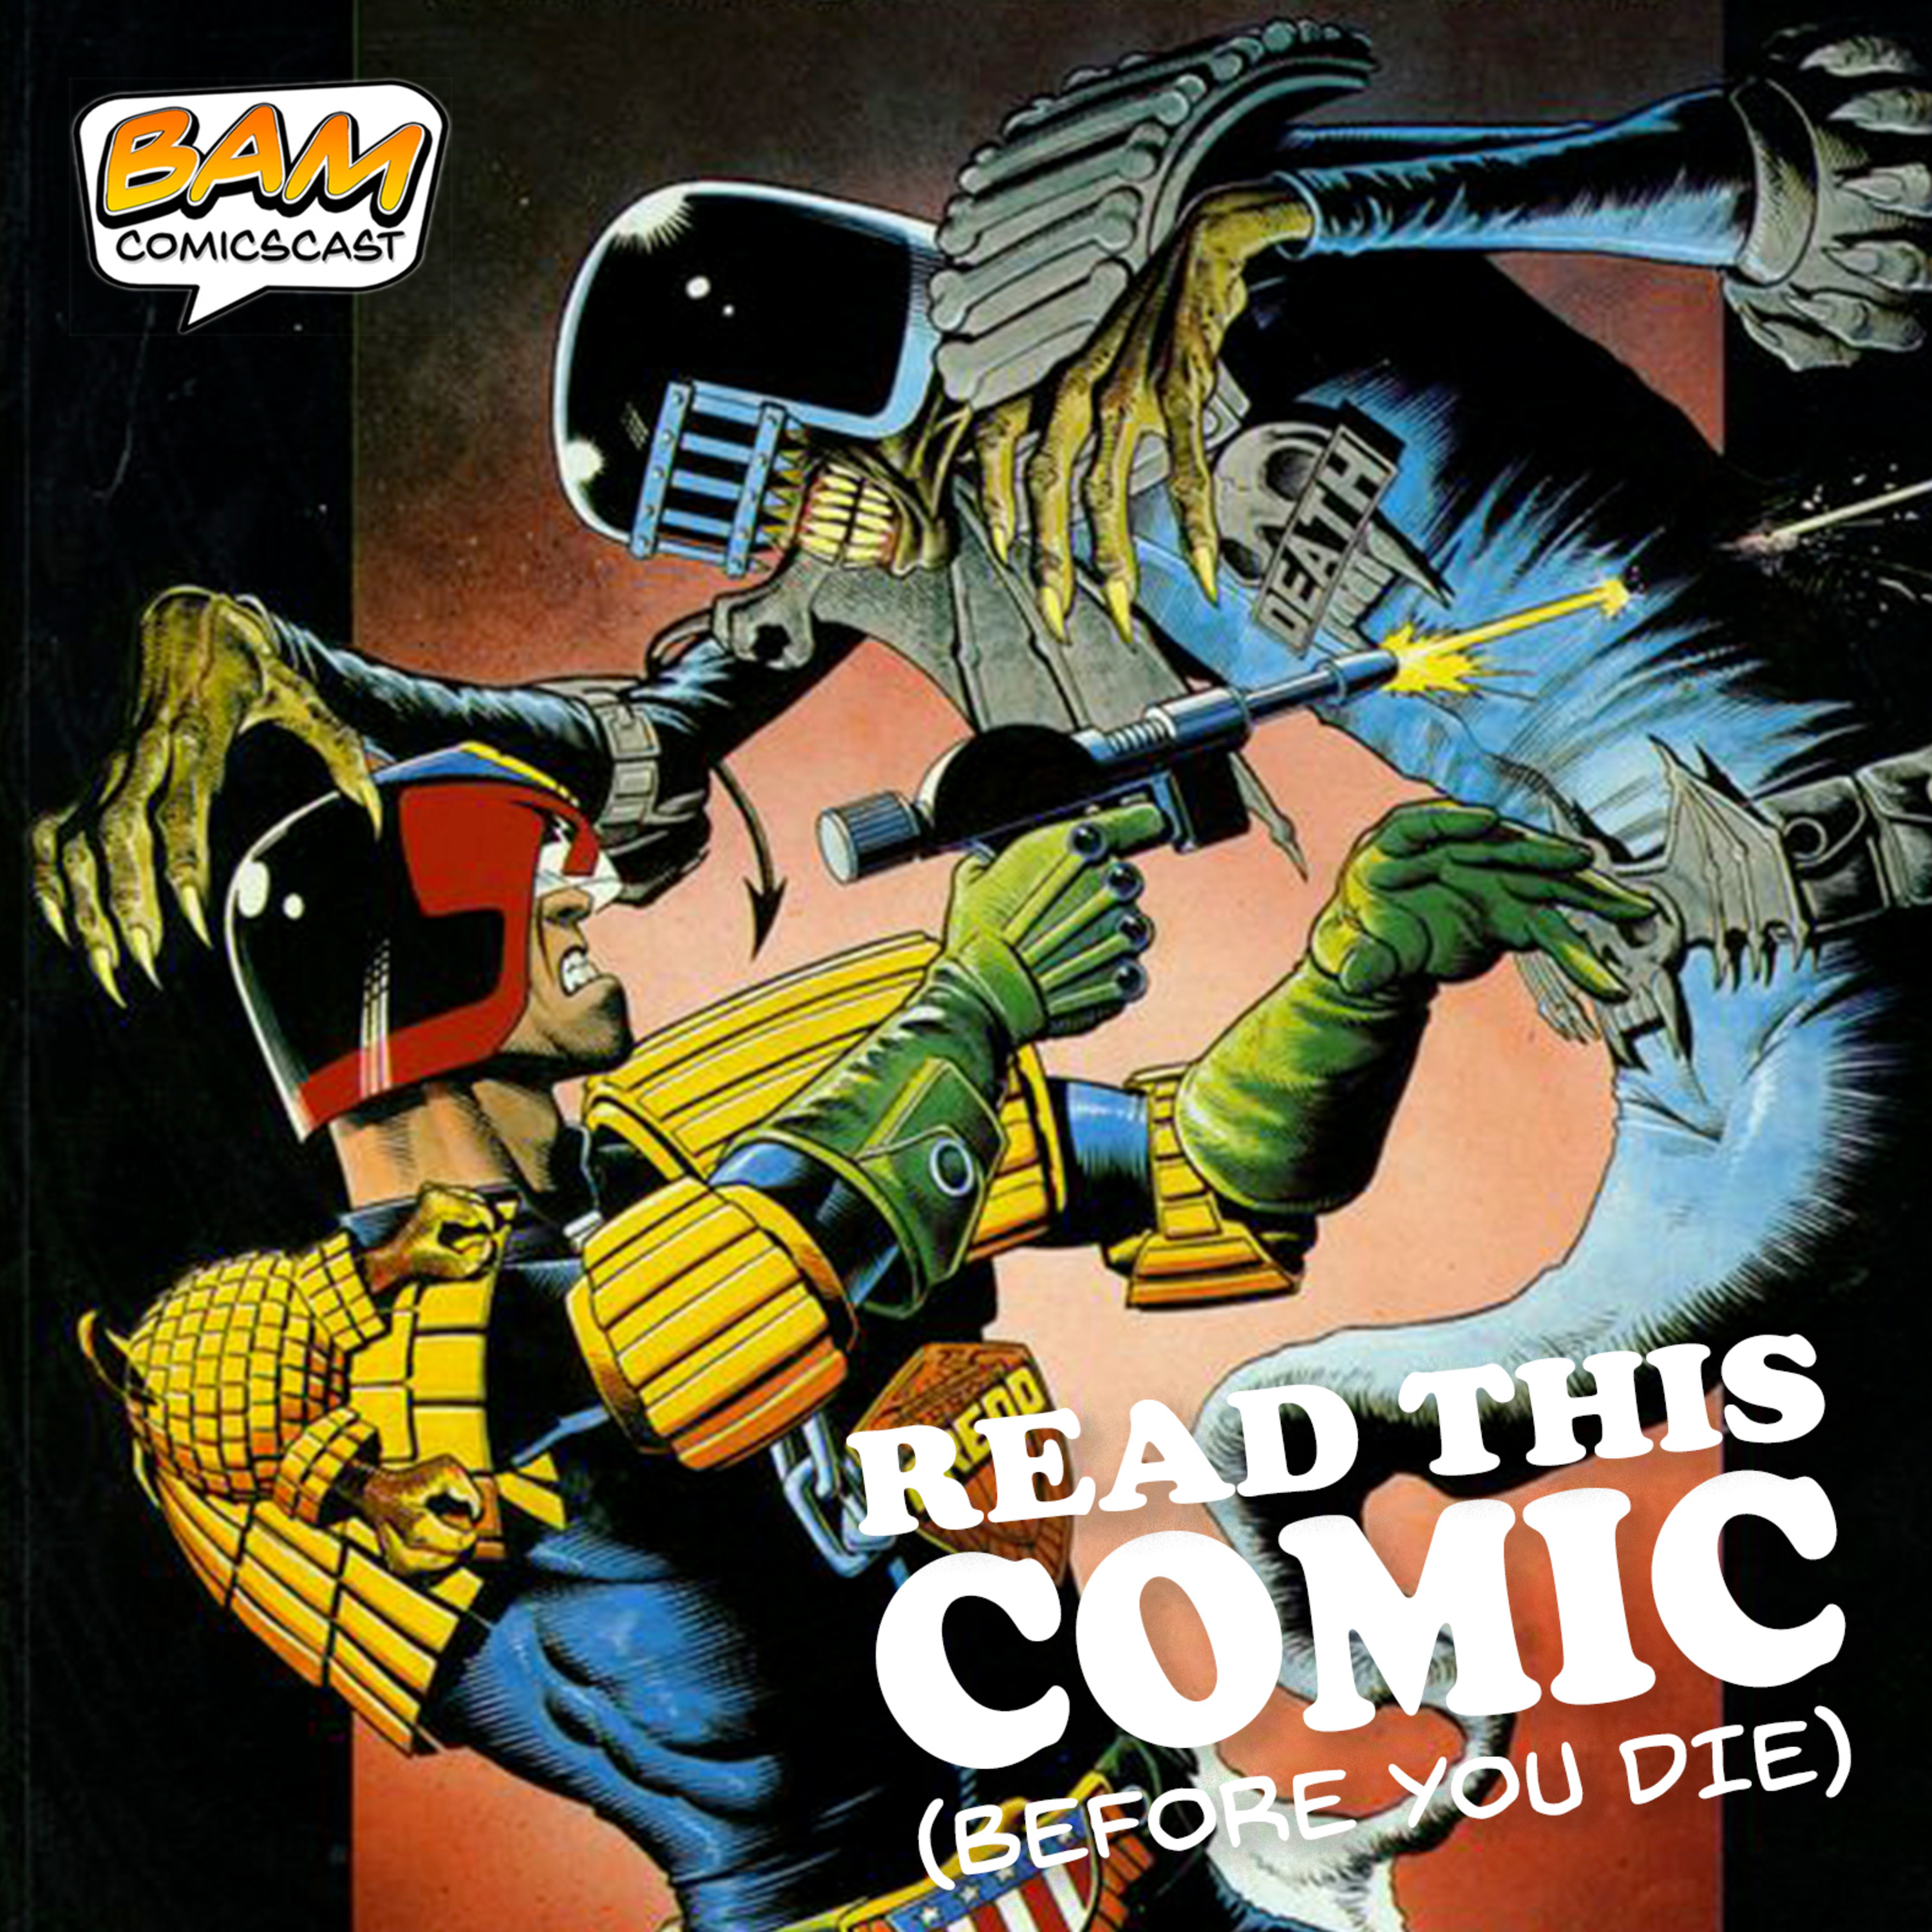 3000px x 3000px - Judge Dredd: Judge Death Lives - Read This Comic (Before You ...